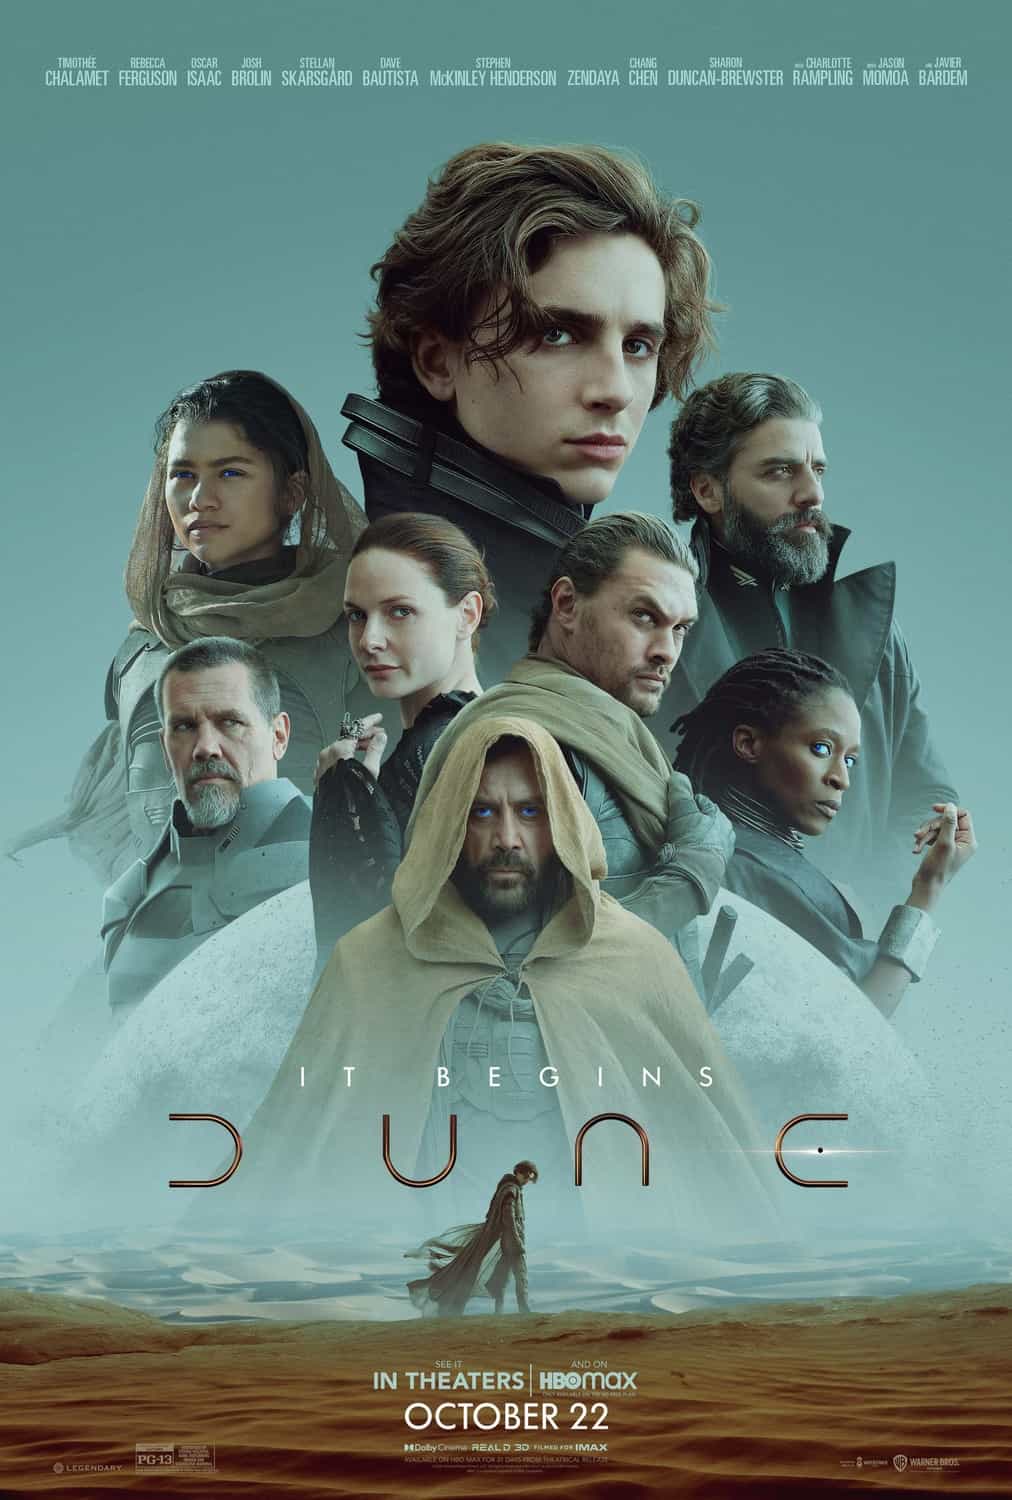 World Box Office Weekend Report 22nd - 24th October 2021:  Dune tops the global box office as the movie goes wide across the world